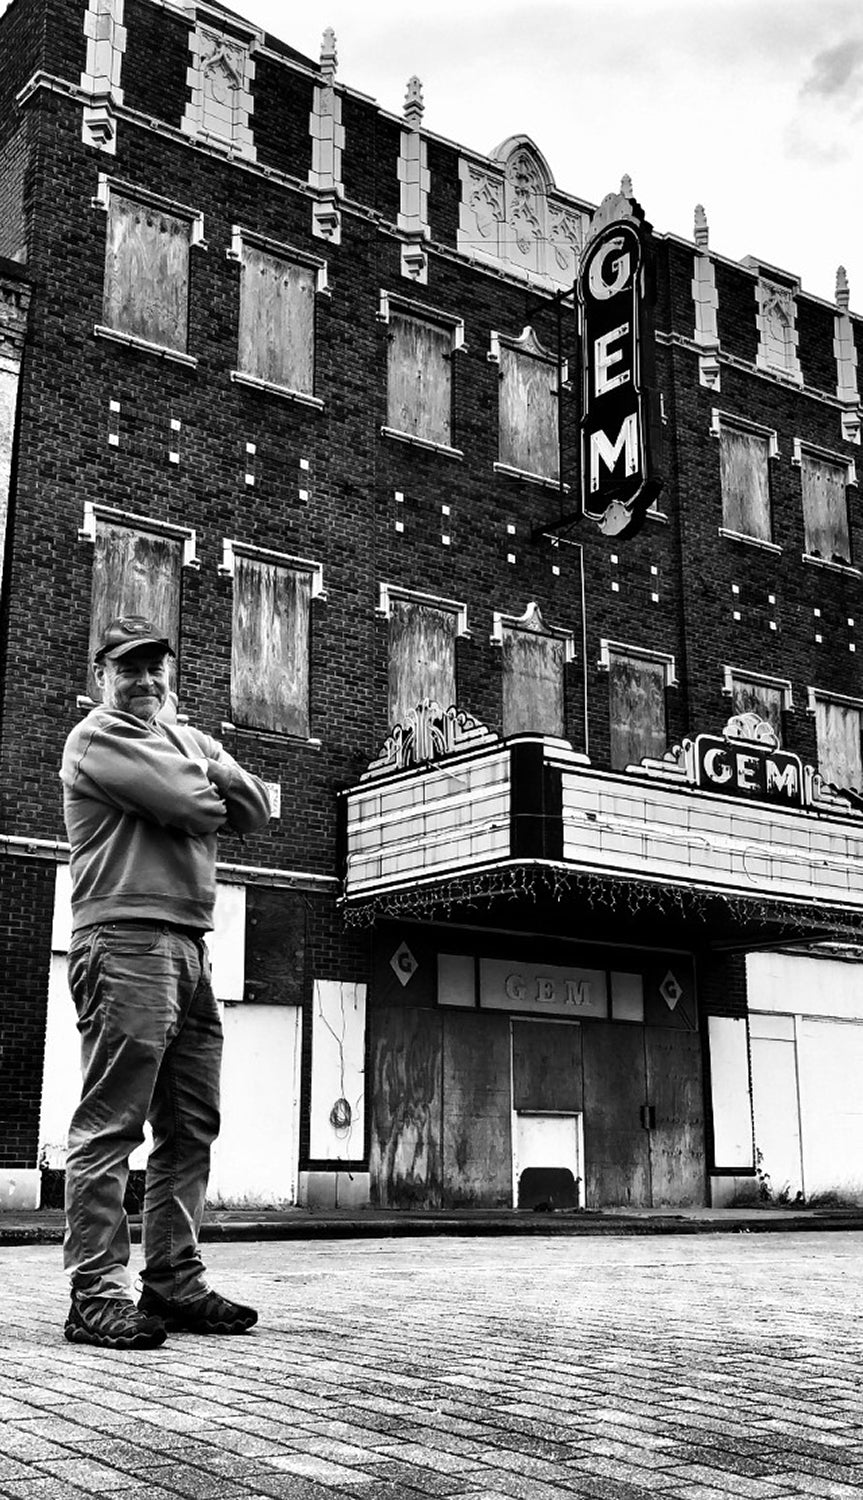 Fine art photographer Keith Dotson on the site of the old Abandoned Gem Theatre in Cairo, Illinois